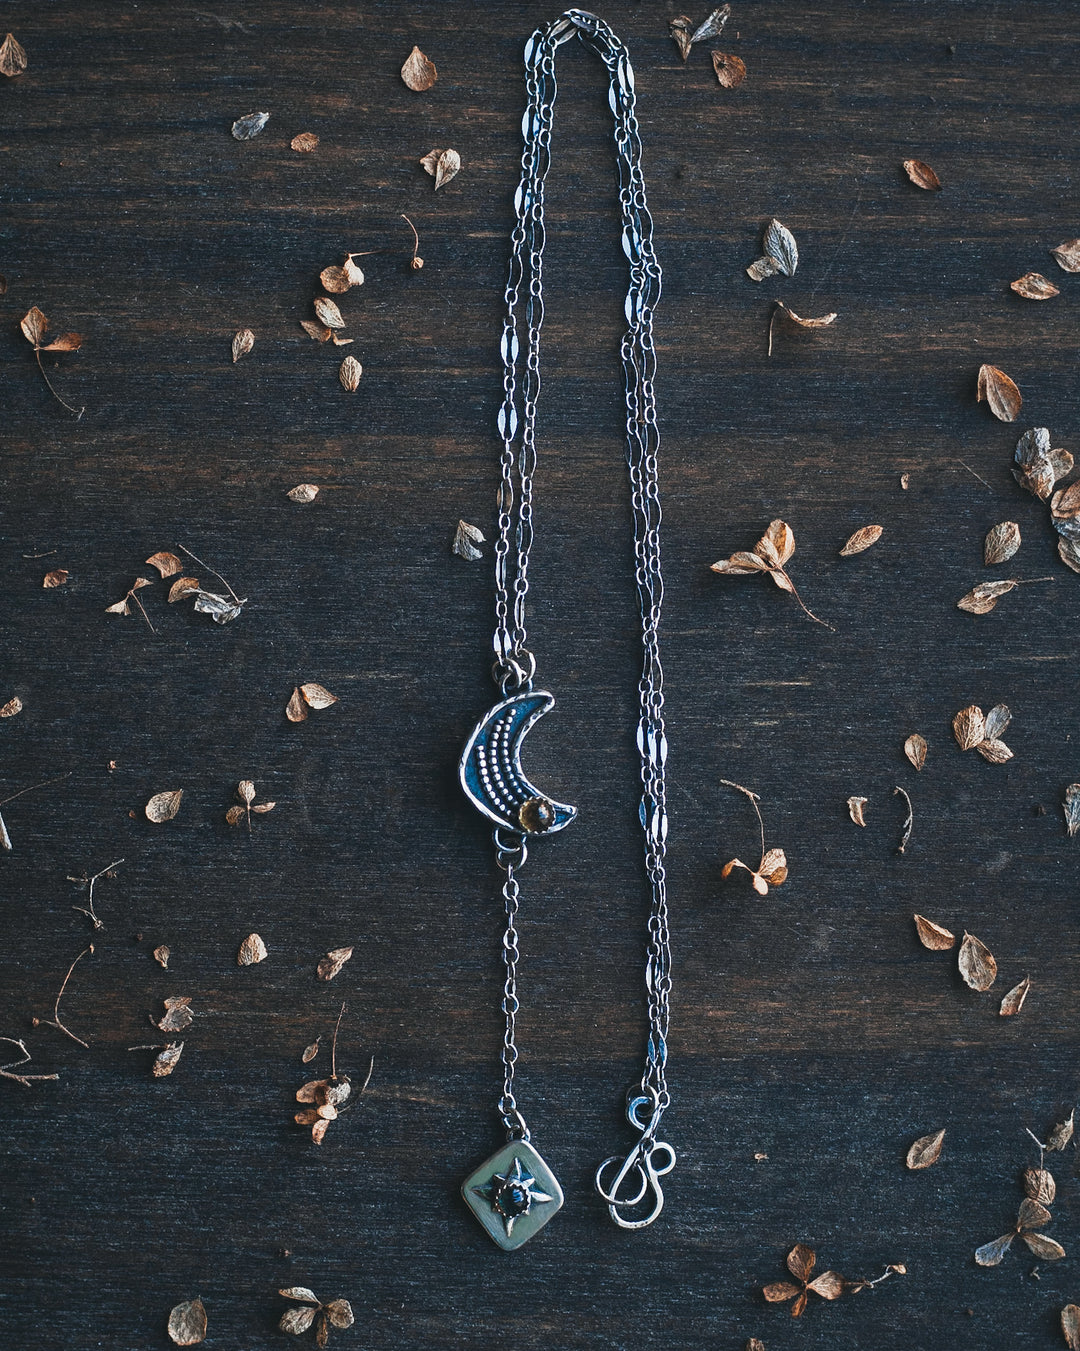 Night Magic Crescent Moon Lariat Necklace with Citrine and Blue Topaz I